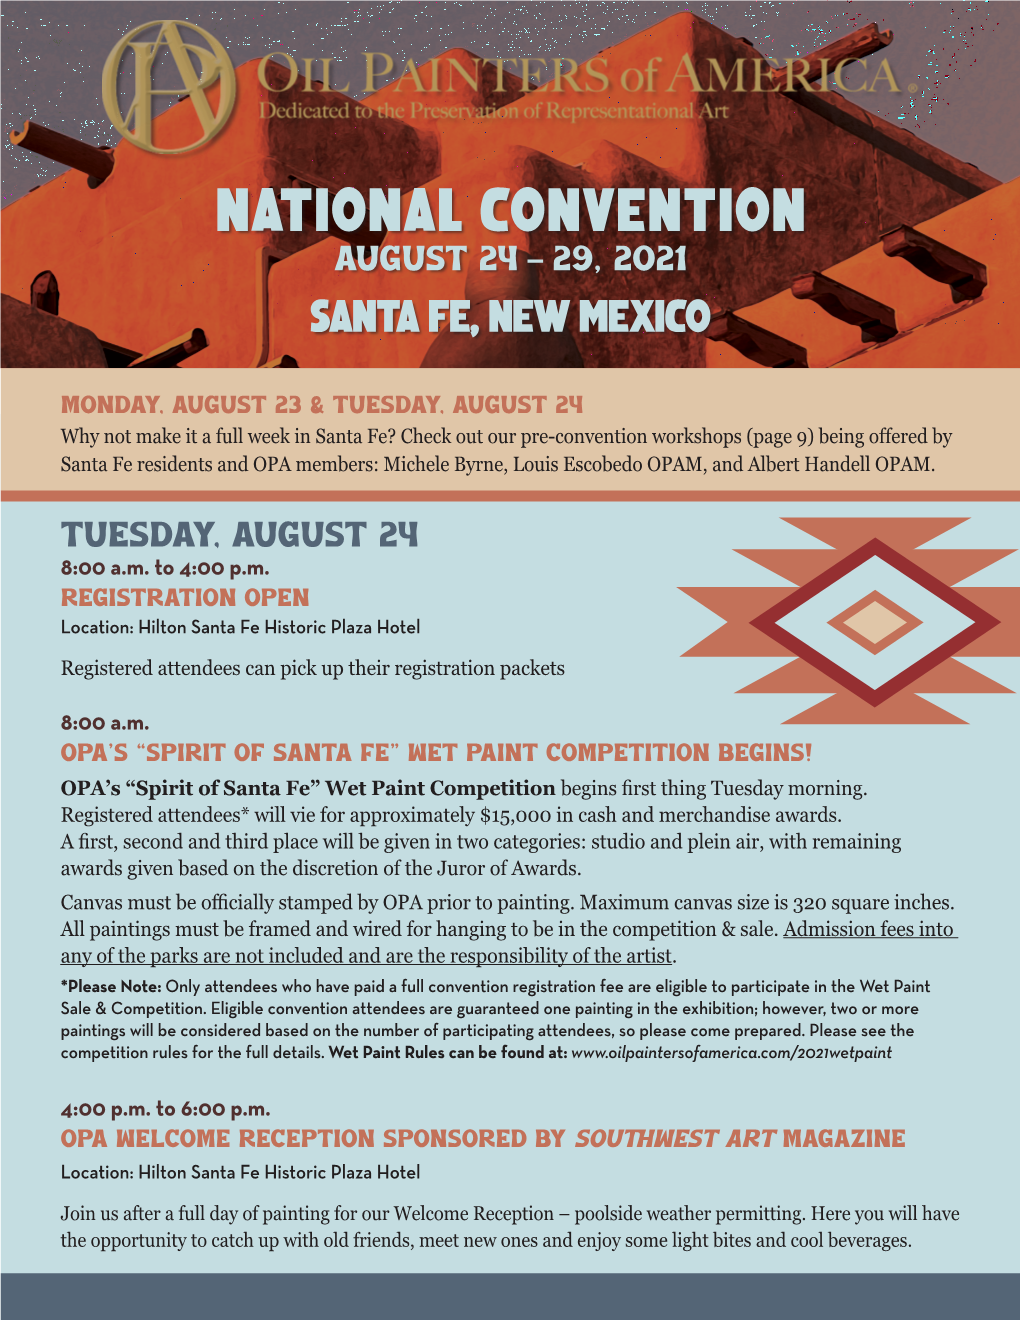 National Convention August 24 – 29, 2021 Santa Fe, New Mexico